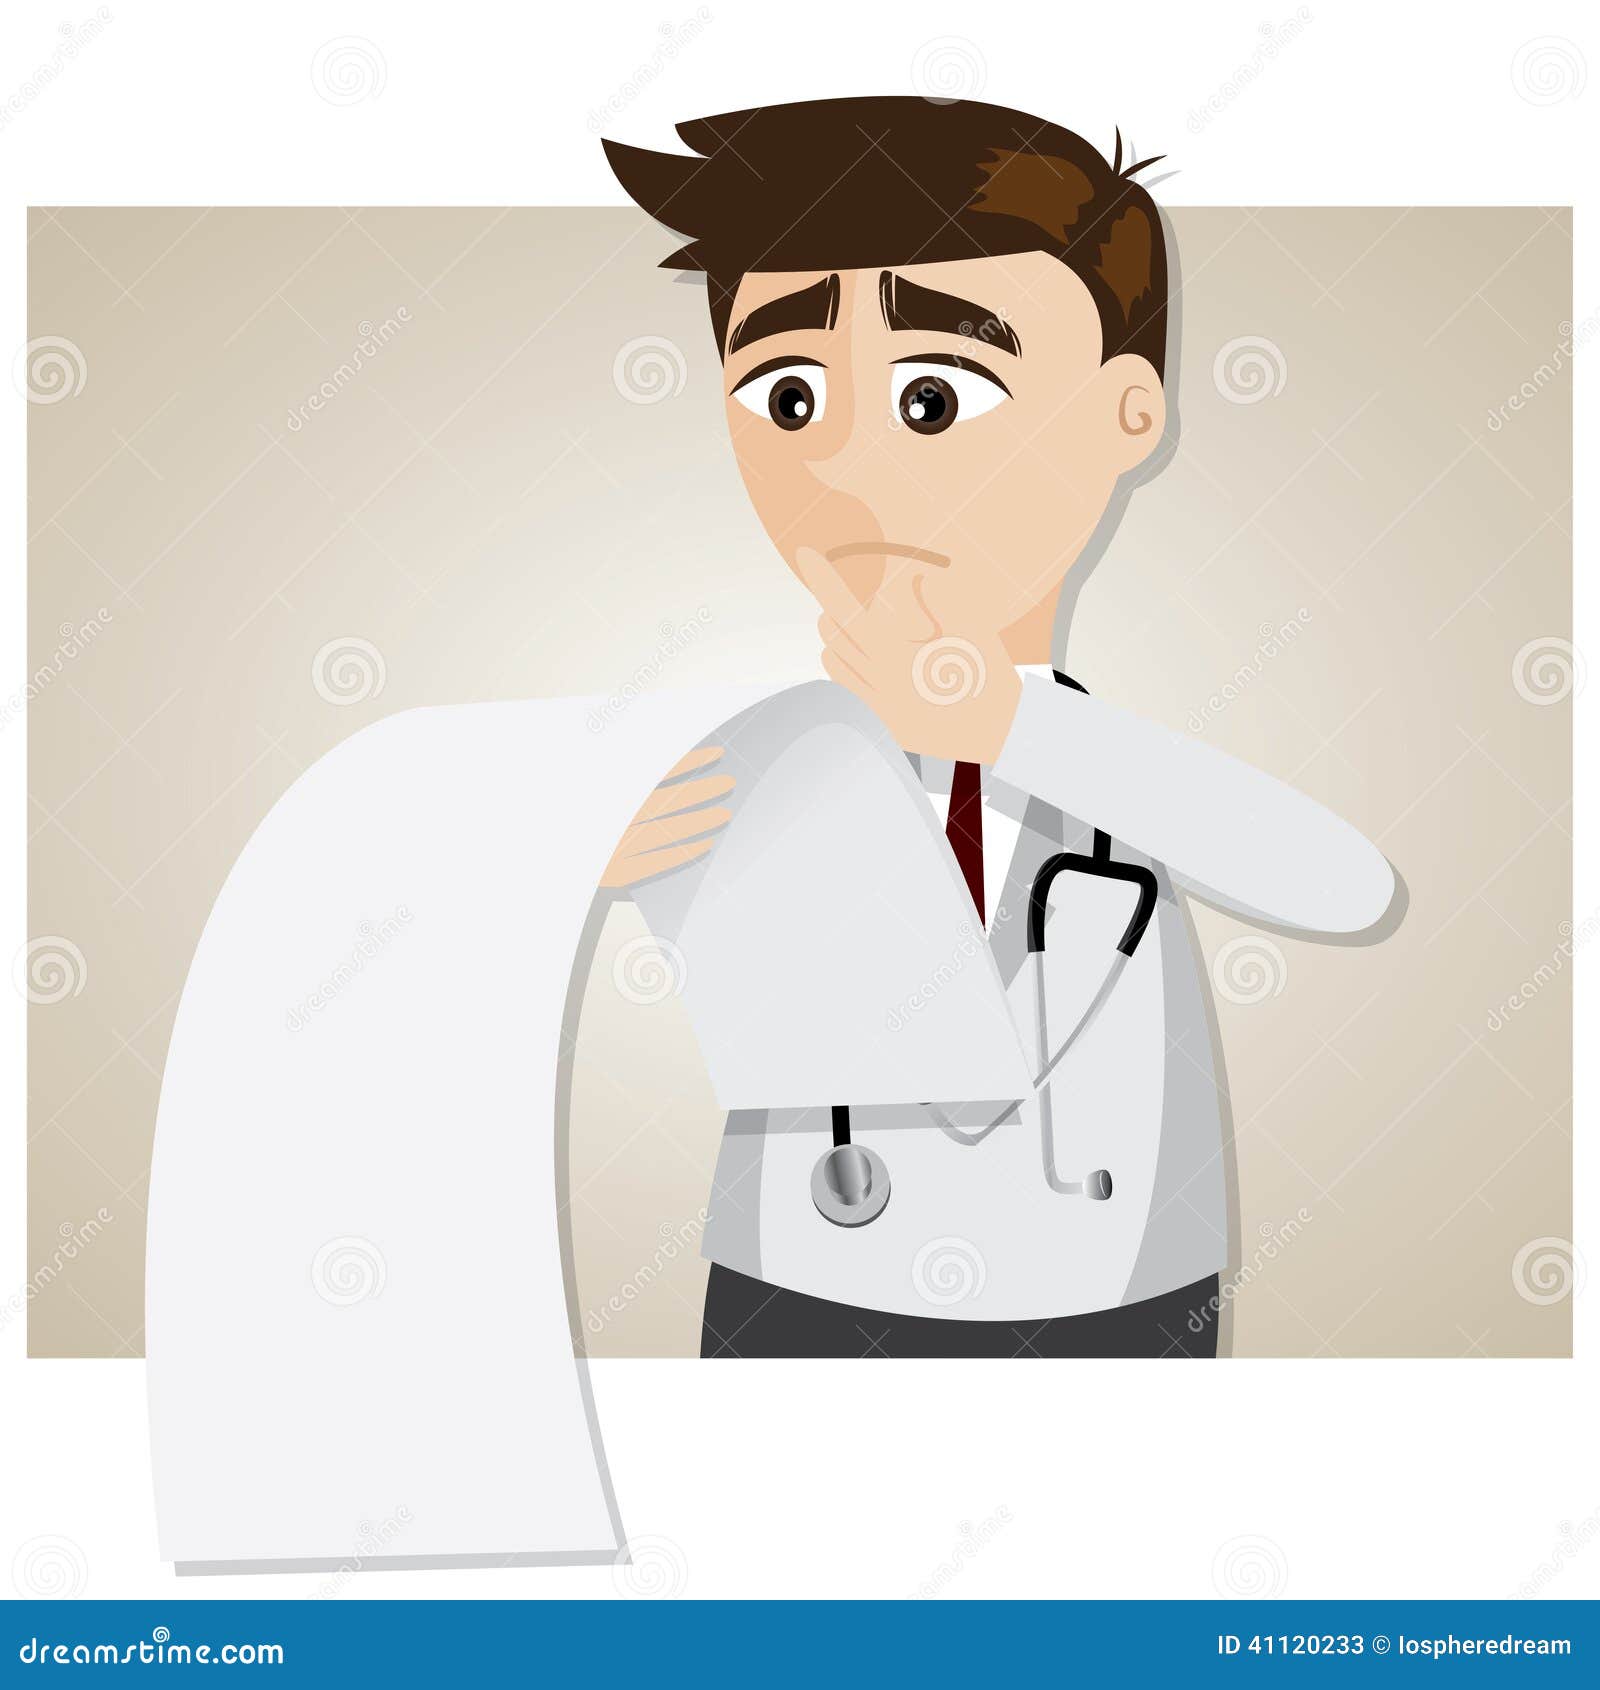 cartoon doctor reading patient information and diagnose